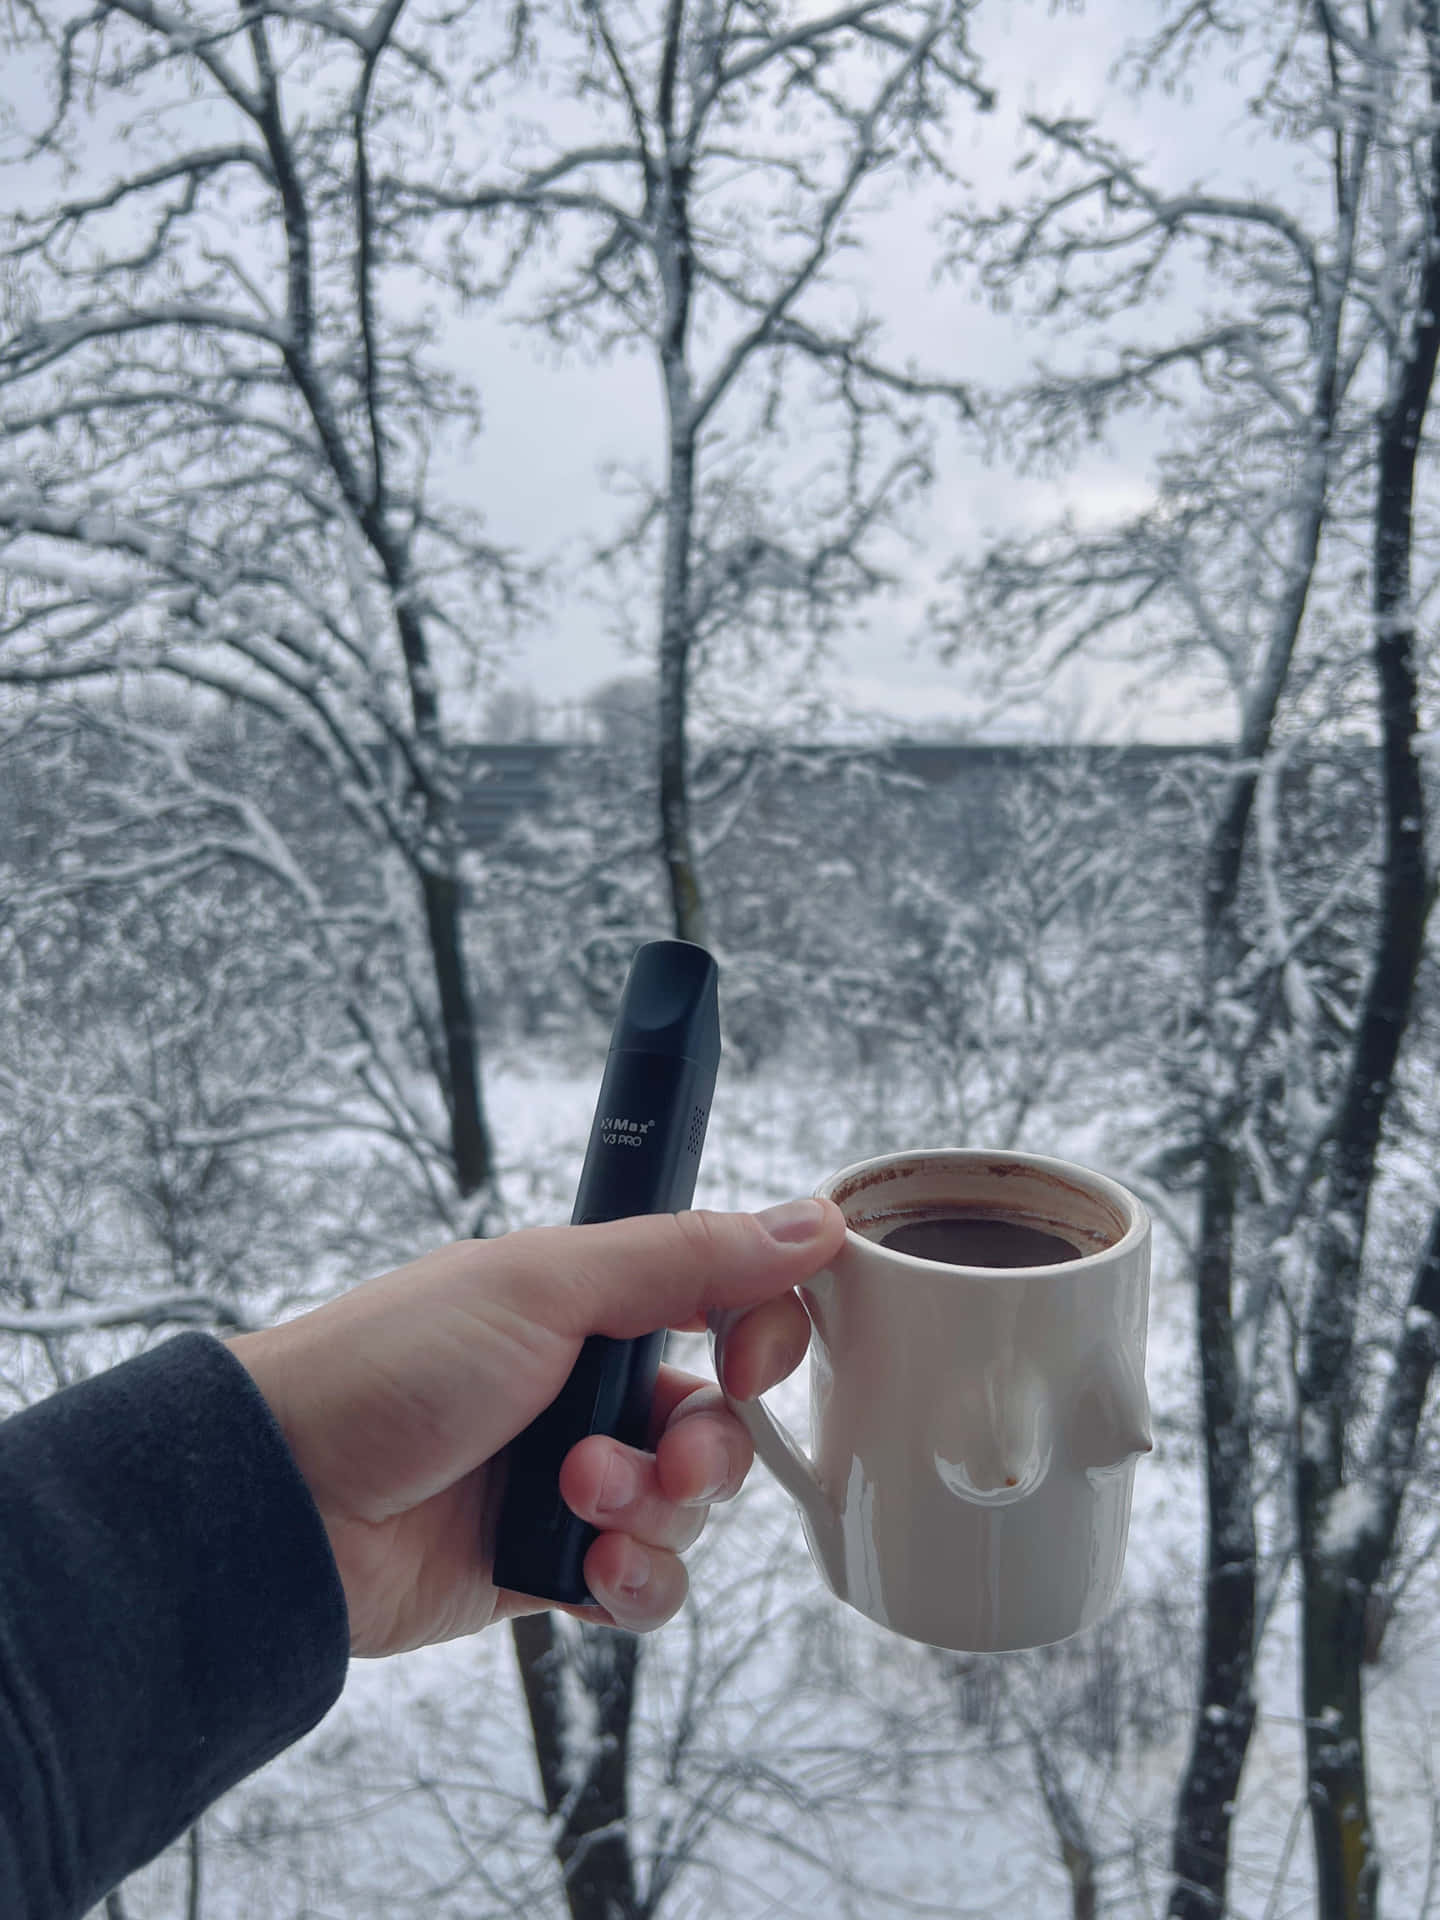 Cozy Winter Aesthetic Vaporizer And Hot Coffee Wallpaper